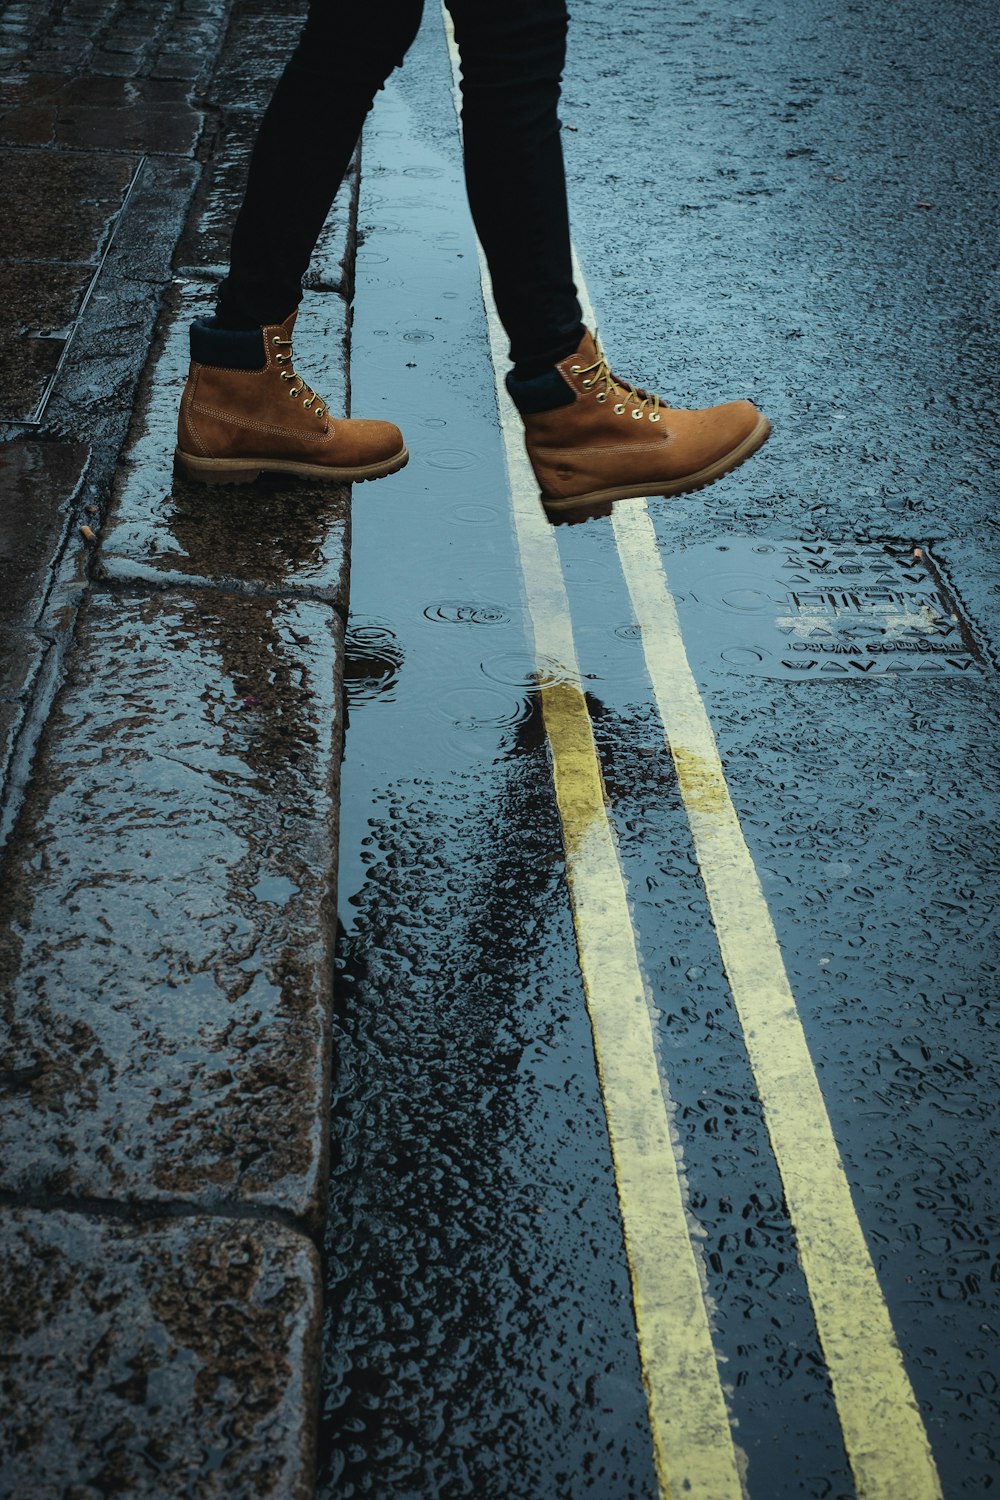 person wearing brown boots walking on a wet road